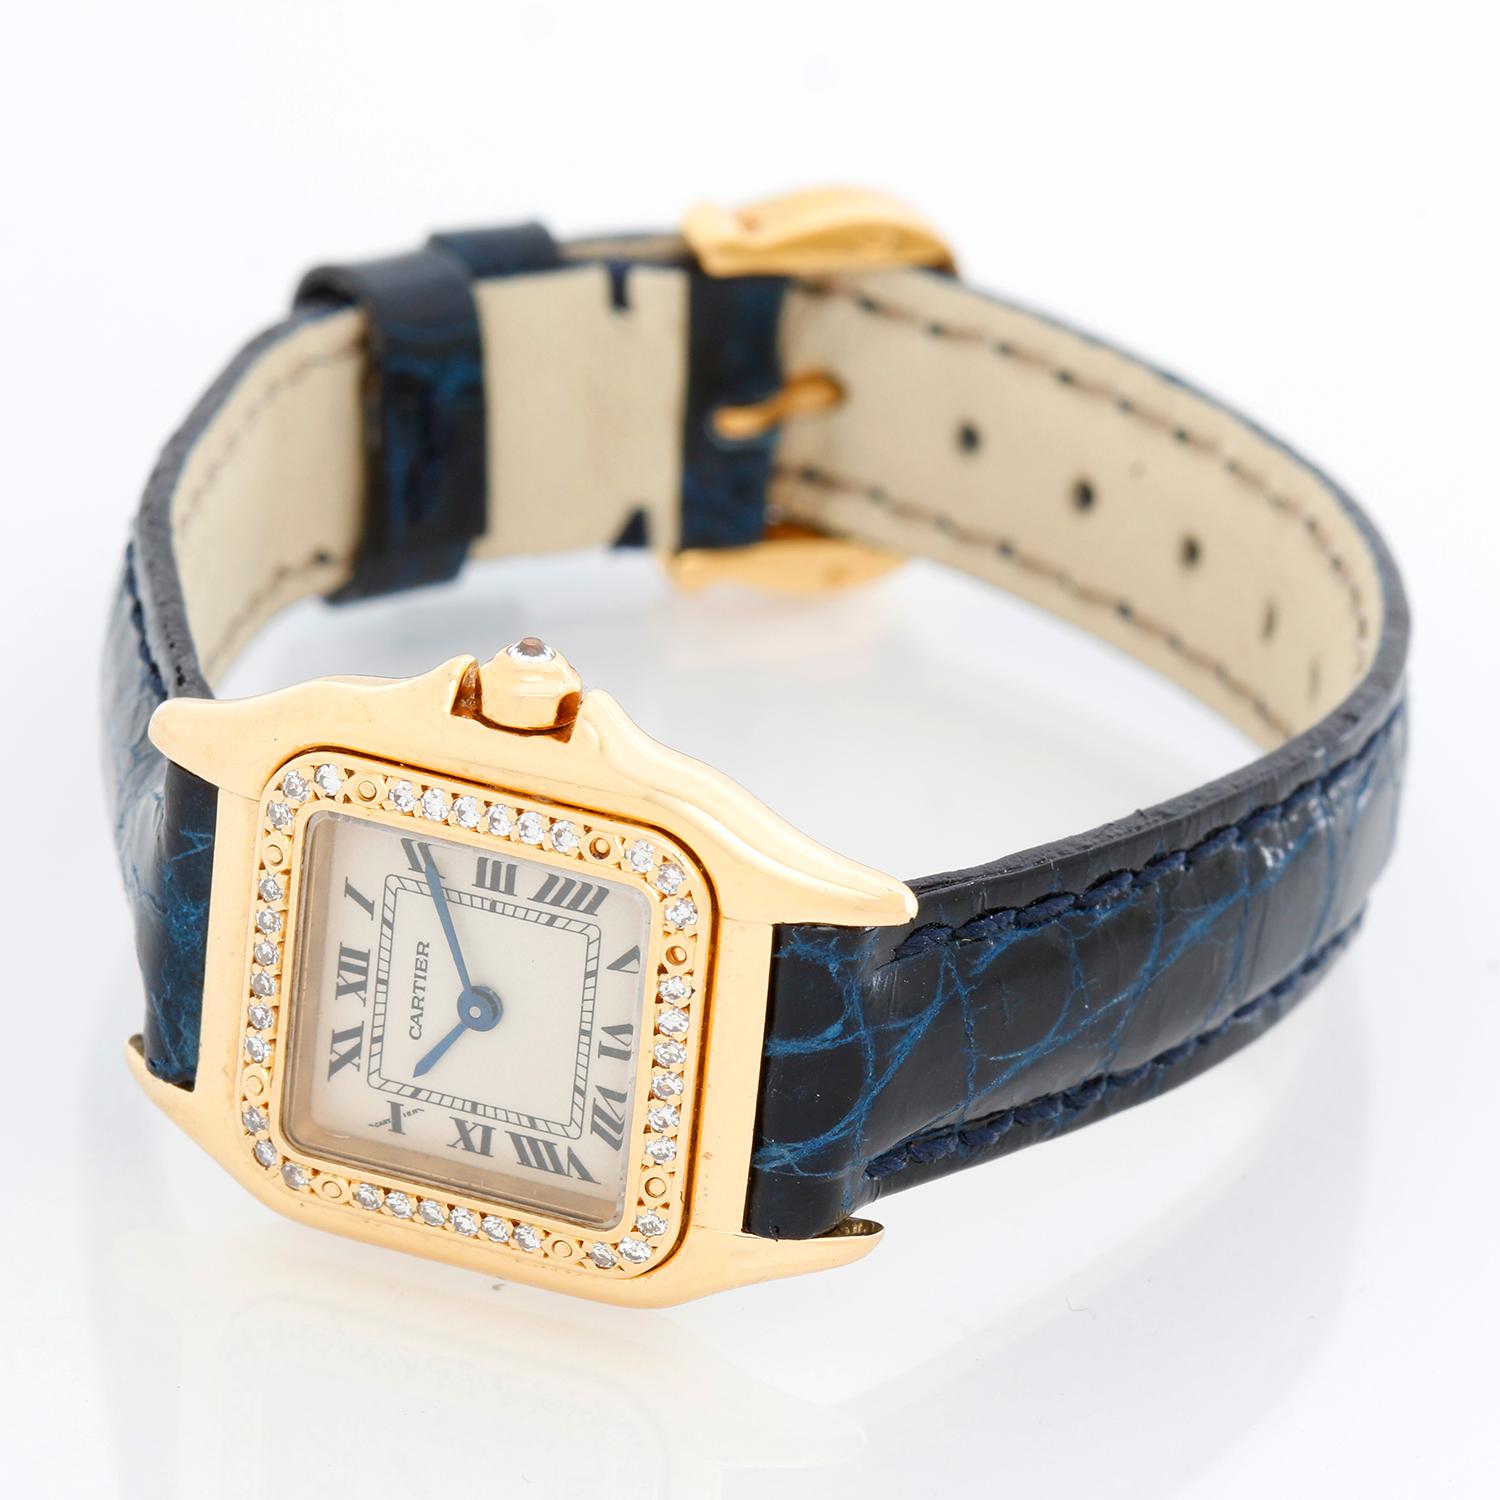 Cartier Panther Ladies 18k Yellow Gold Diamond on Strap - Quartz. 18k yellow gold case with factory diamond bezel (21mm x 30mm). Ivory colored dial with black Roman numerals. Blue leather strap with tank buckle . Pre-owned with custom box.